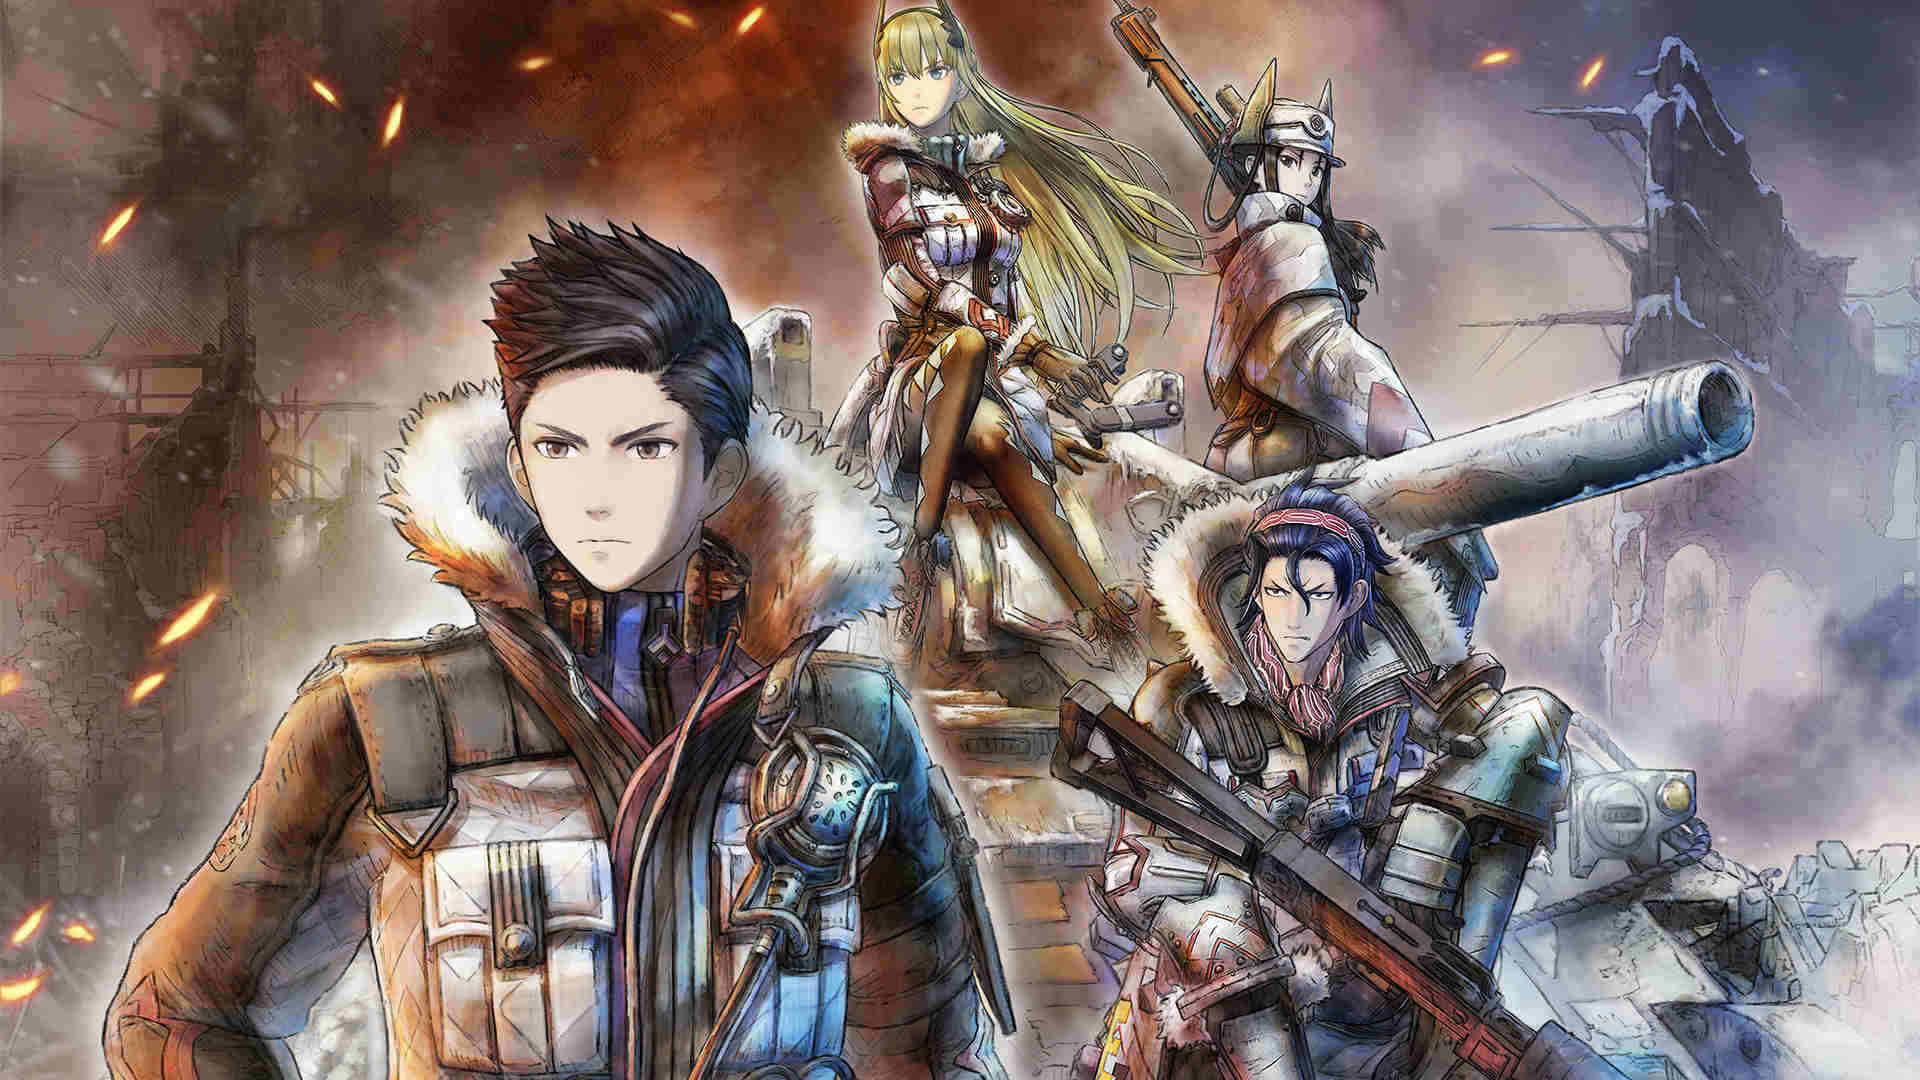 Come reclutare Mabel Drake in Valkyria Chronicles 4